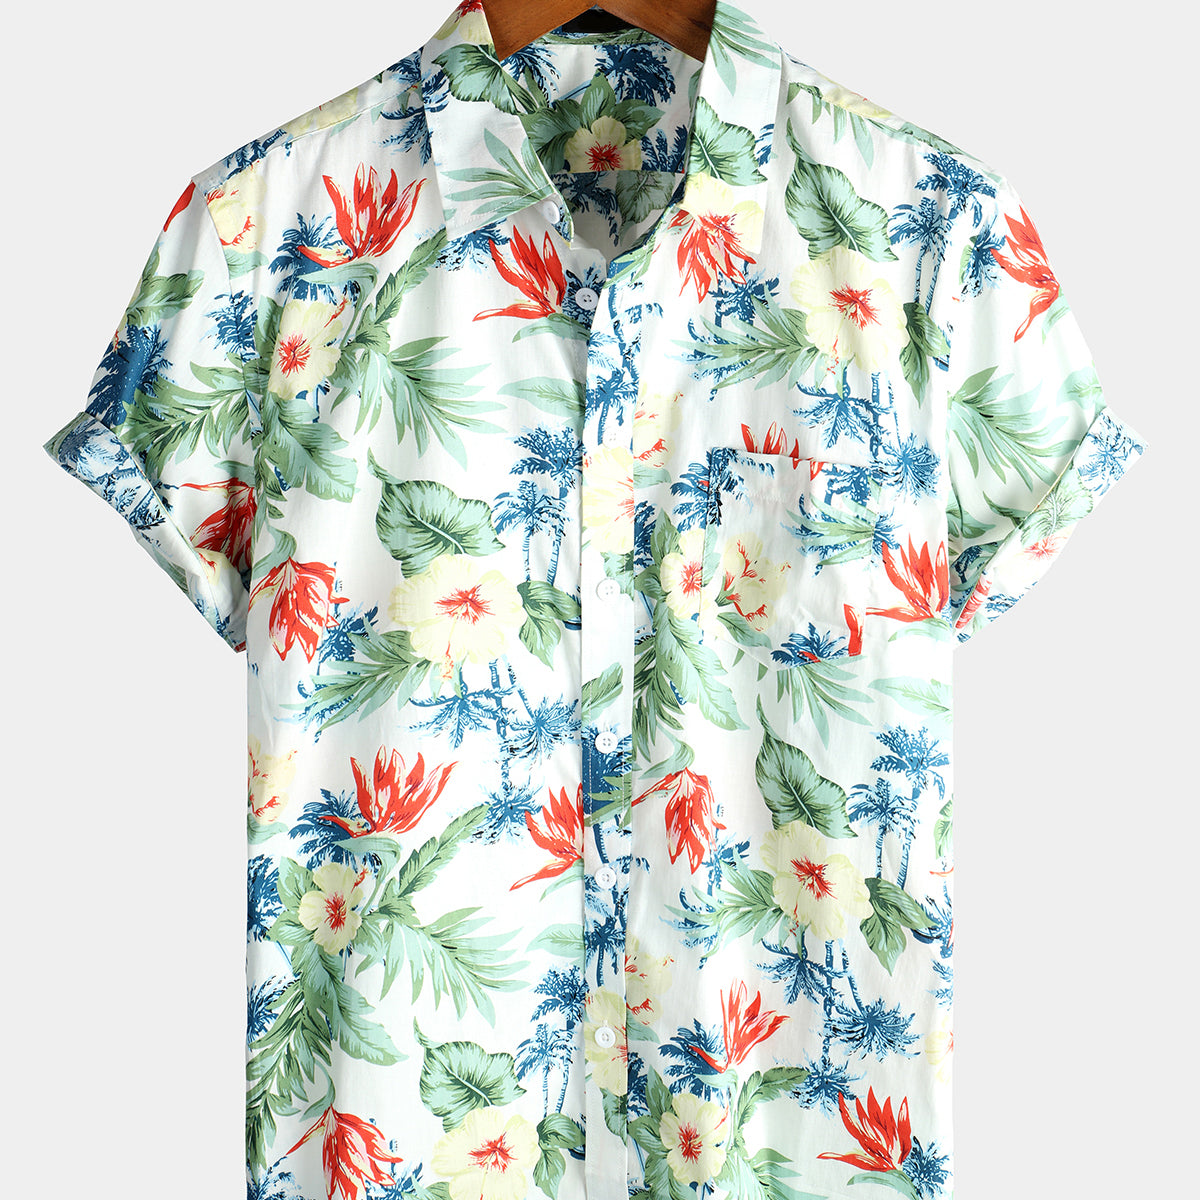 Men's Tropical Floral White Pocket Holiday Cotton Short Sleeve Shirt